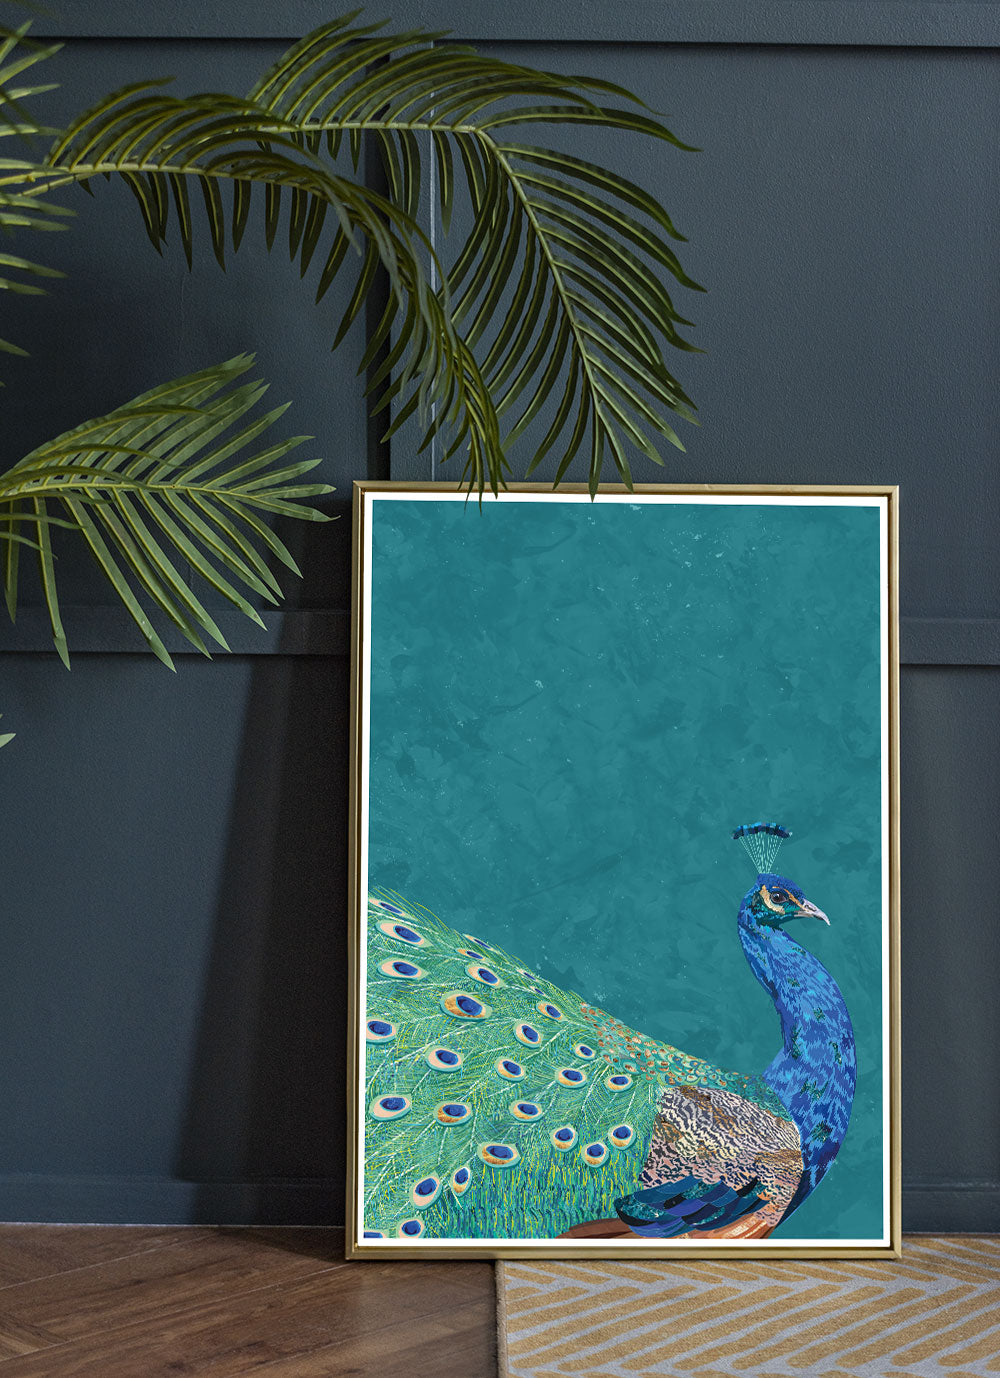 Peacock Art Print by Sarah Manovski in a stunning room with a house plant